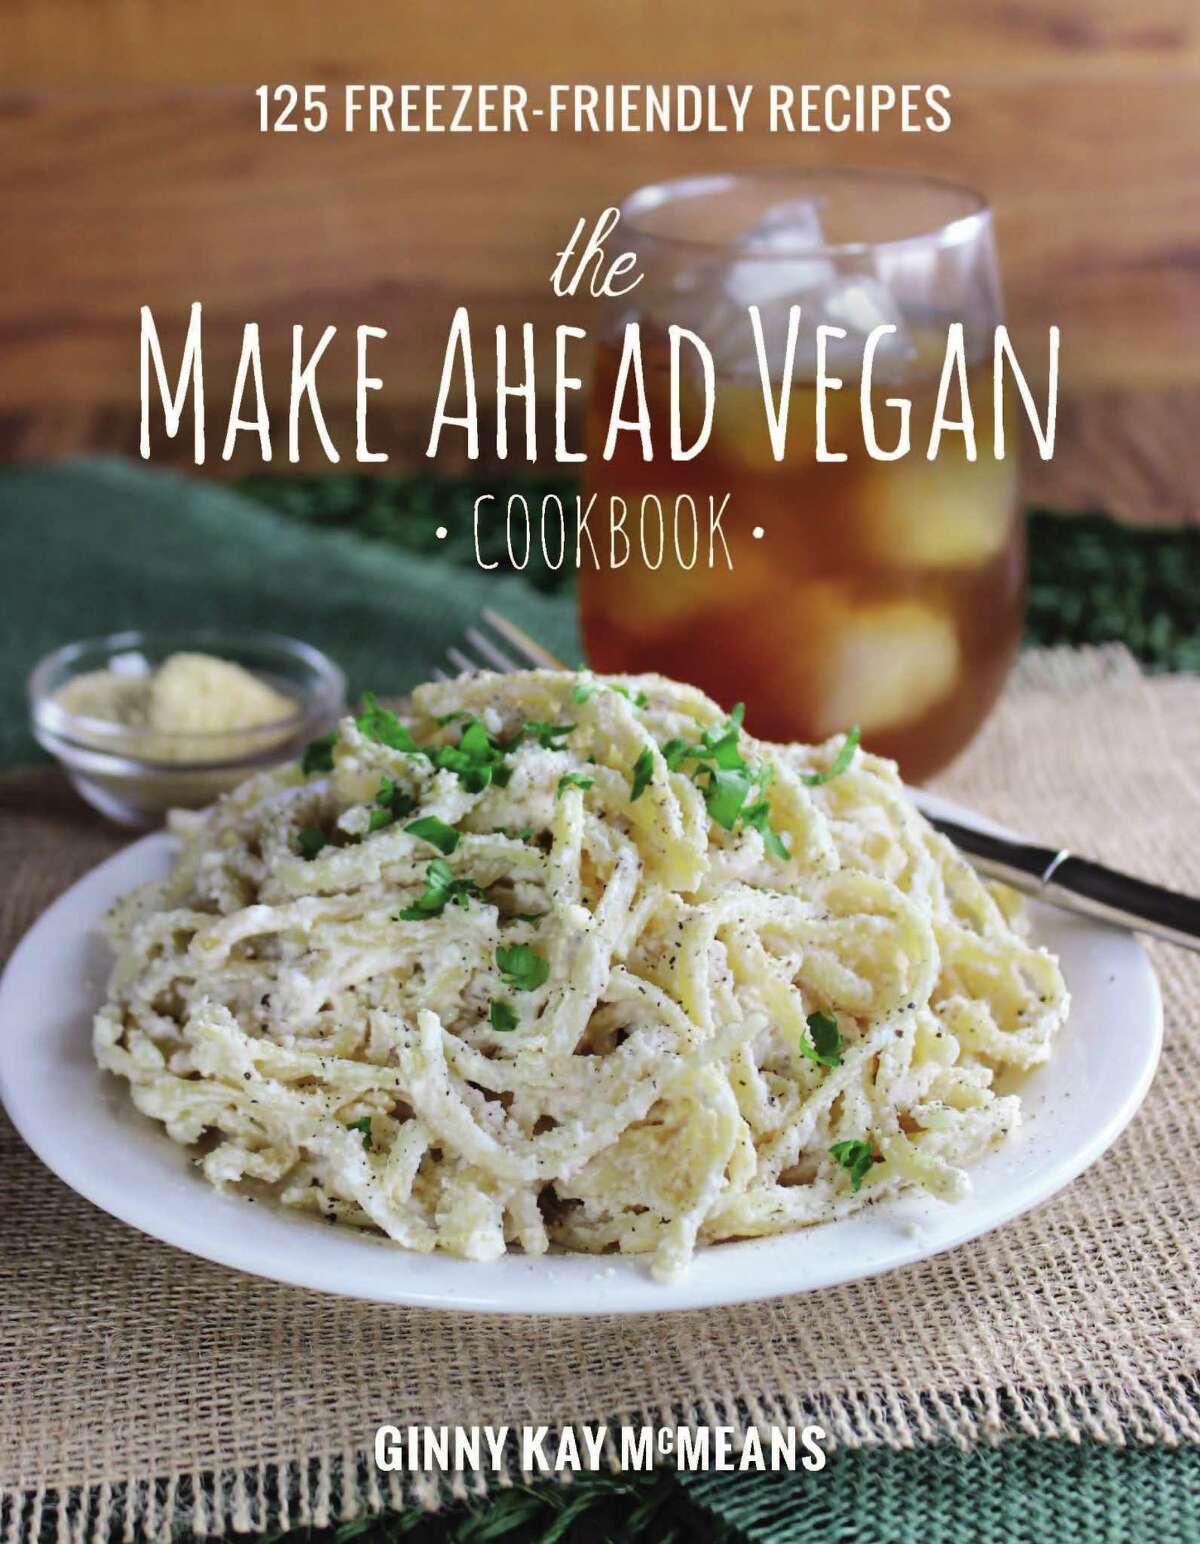 the Make Ahead Vegan by Ginny Kay McMeans, published by Countryman Press, $24.95, 304 pages